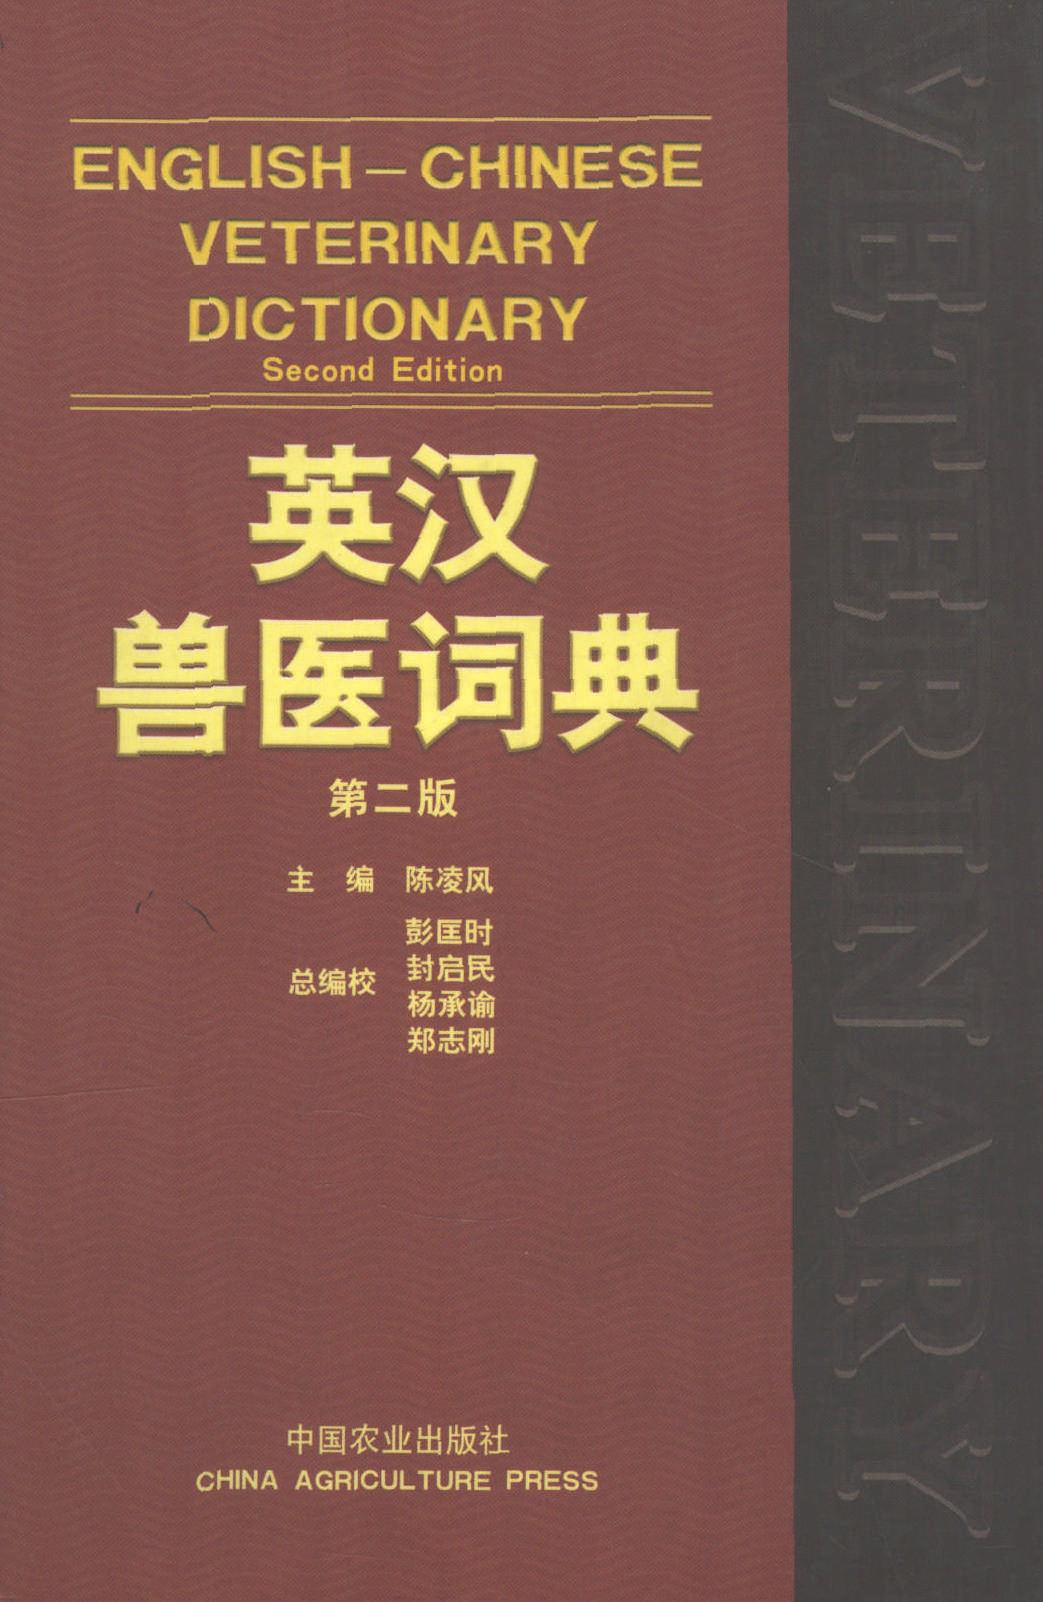 A Medical Dictionary of English-Chinese and Chinese-English Collocations  英汉·汉英医学搭配词典by Lin Shengqu. 林生趣